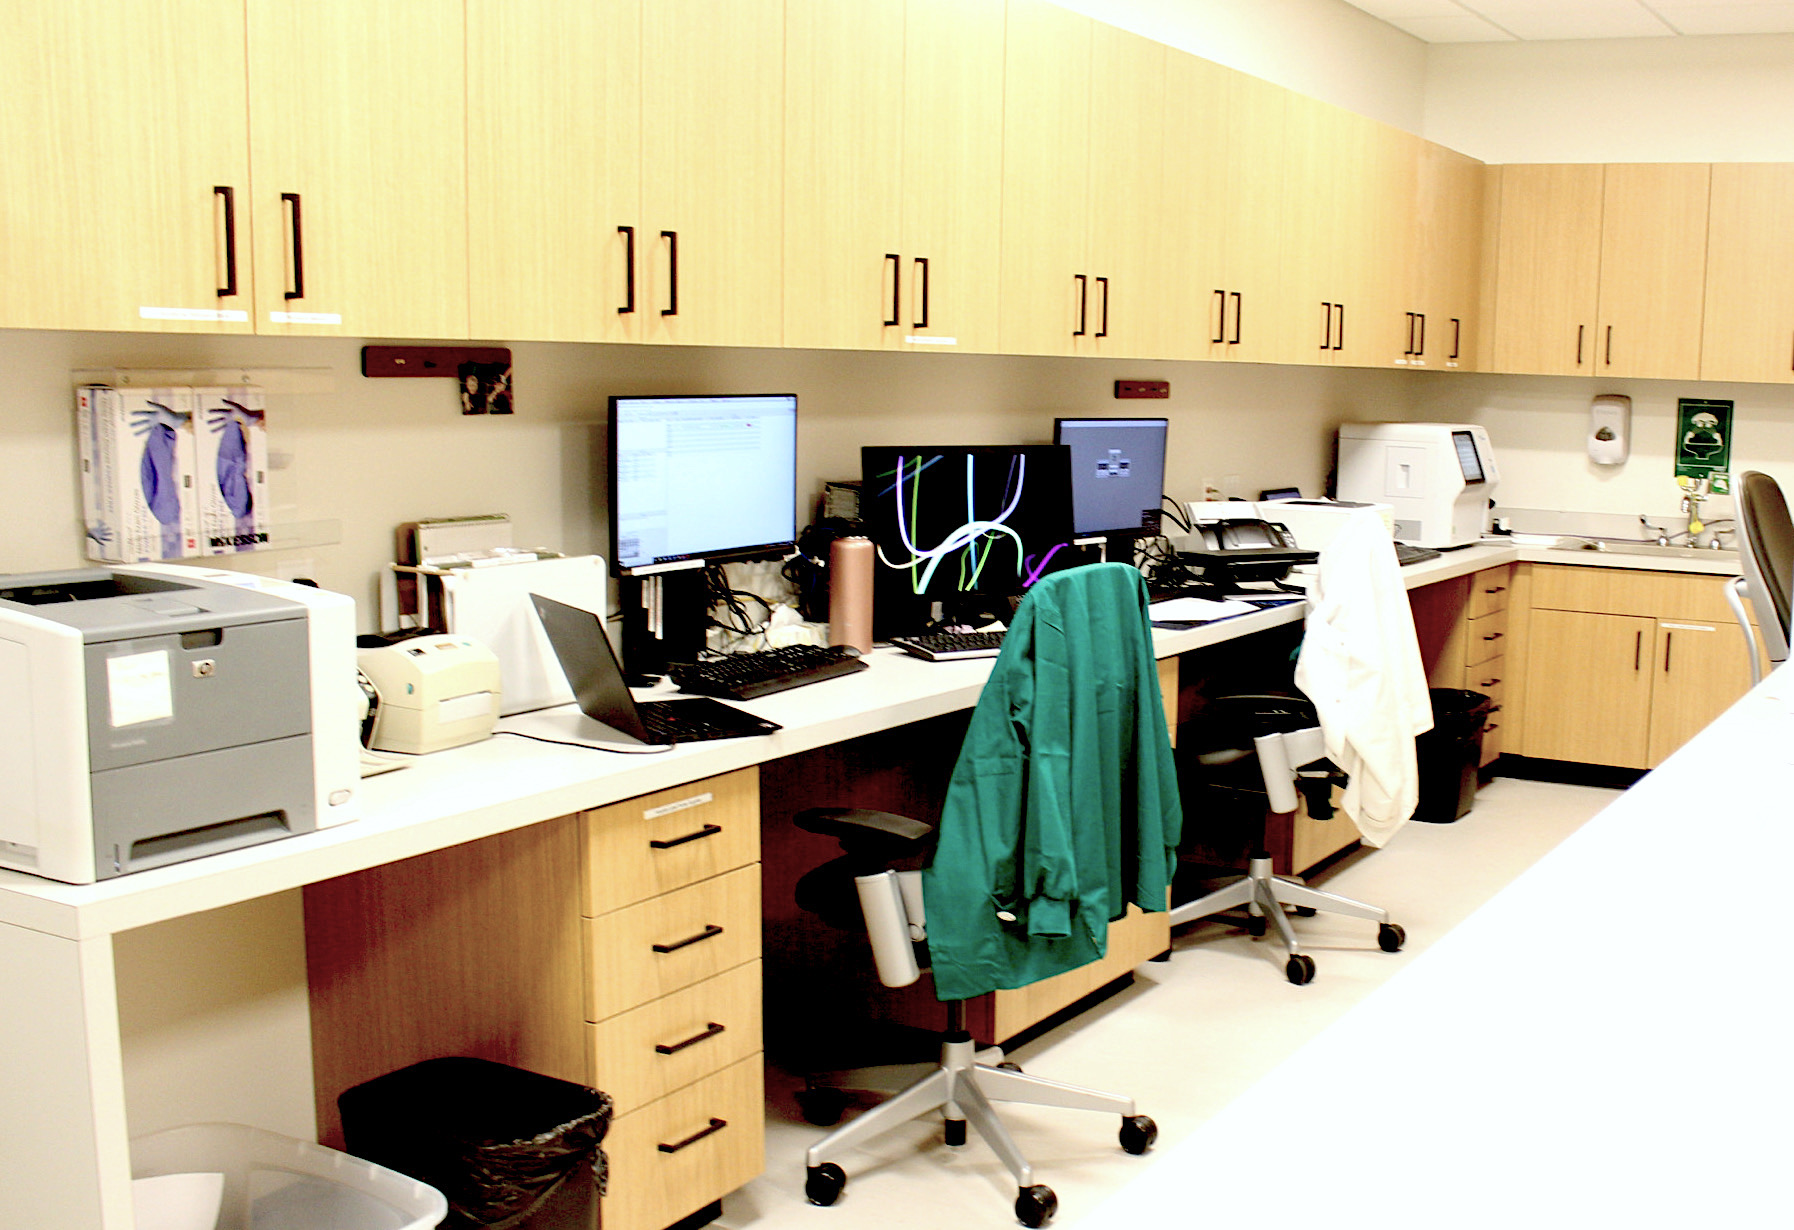 Expanded lab capable of doing tests ordered by campus or off-campus physicians.